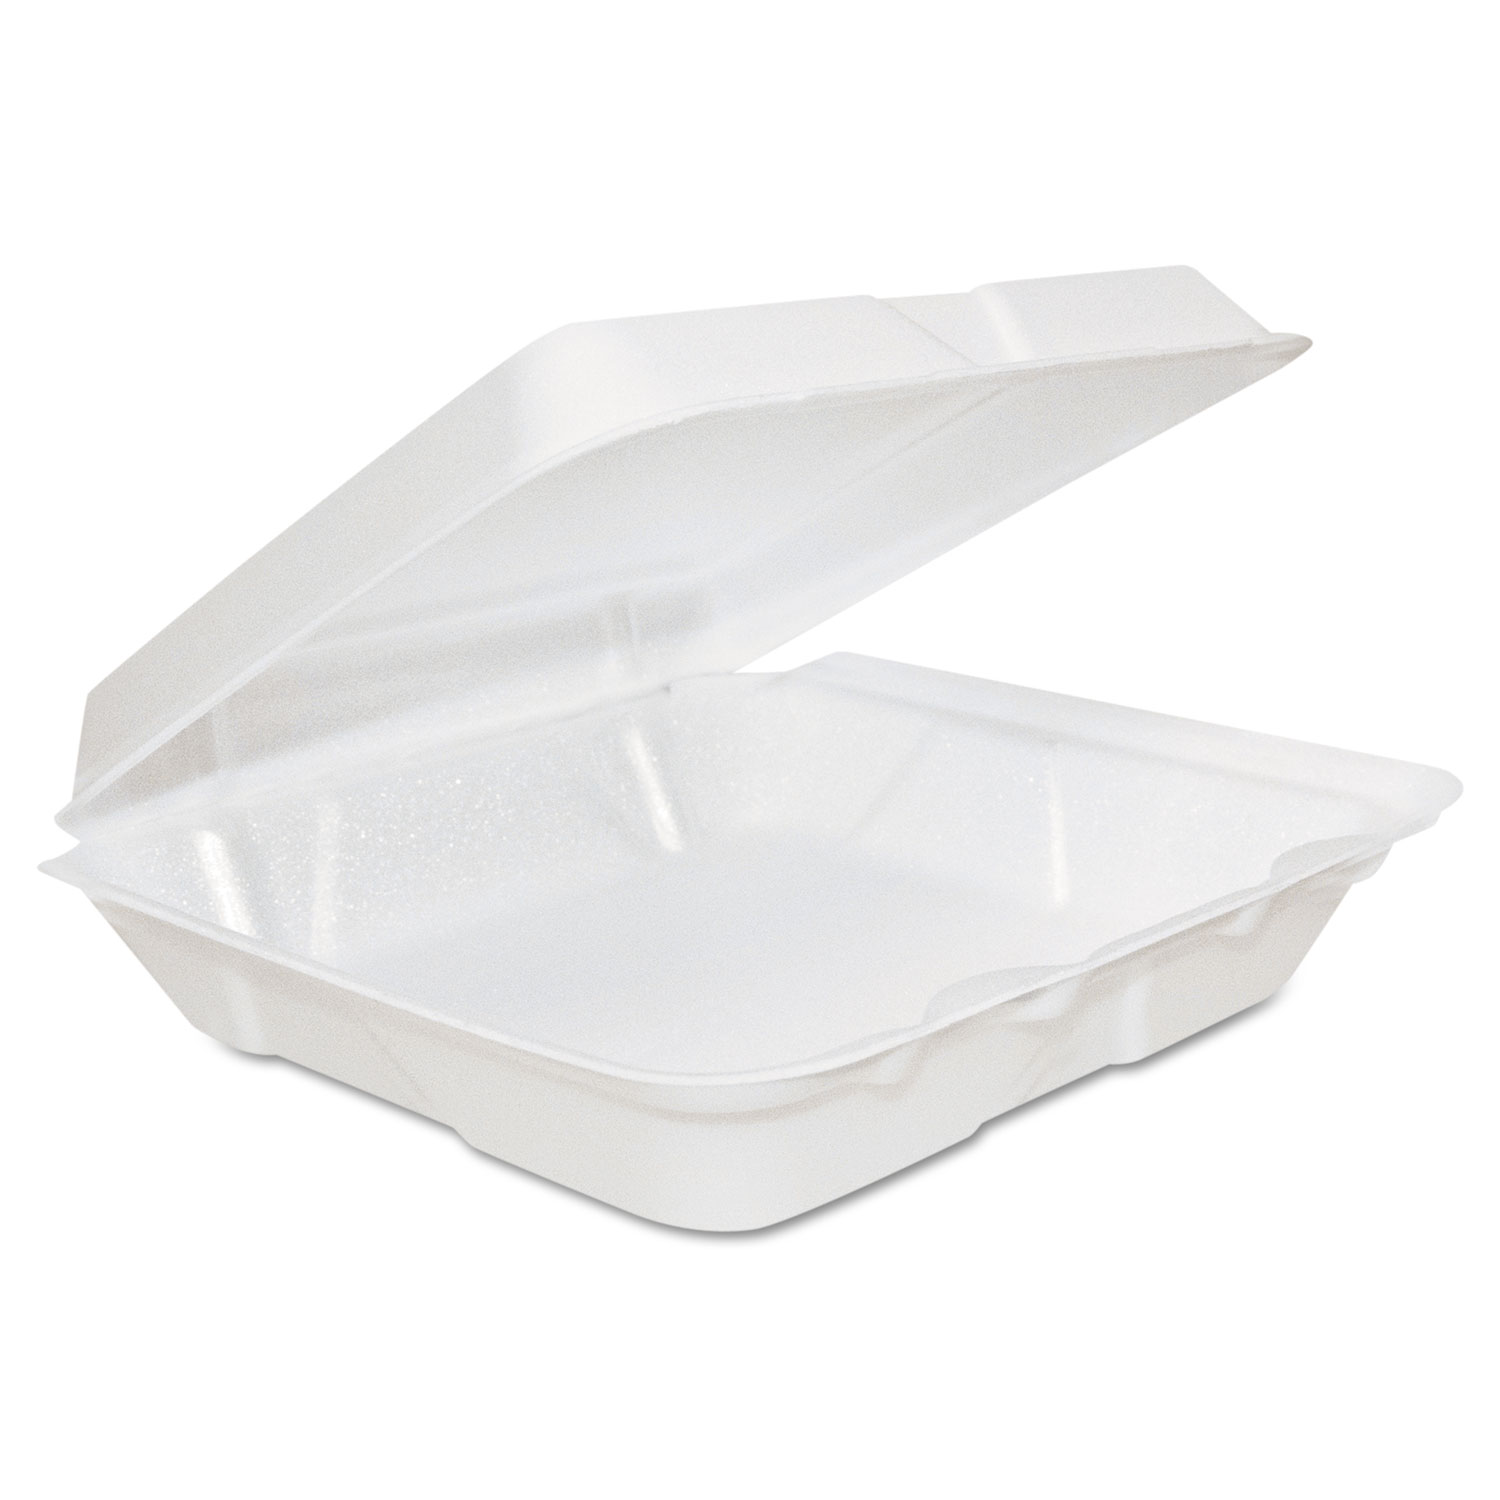 Dart Carryout Food Container, Foam, 1-Comp, 200 Containers (DCC205HT1)